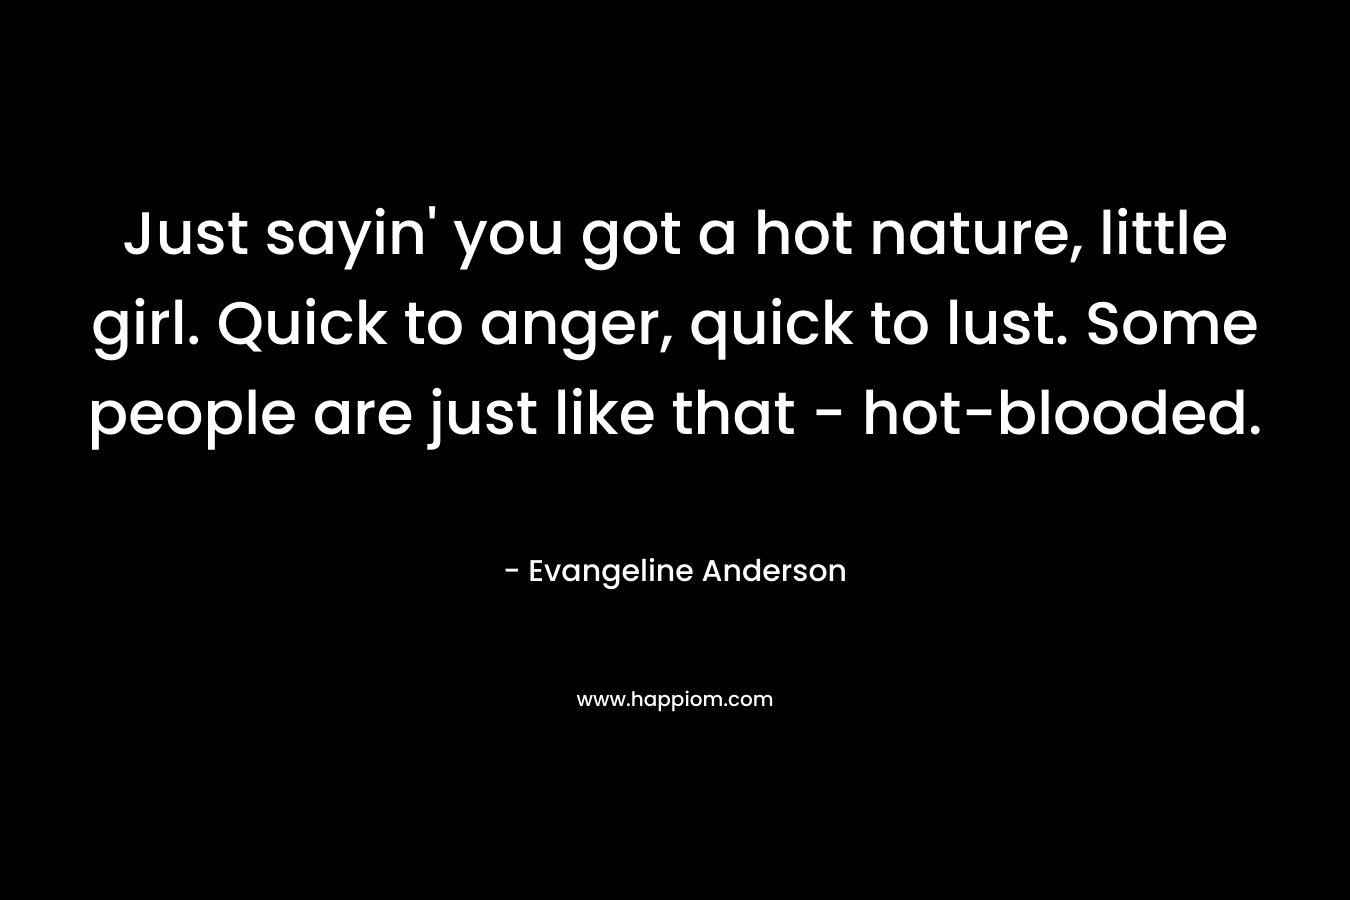 Just sayin' you got a hot nature, little girl. Quick to anger, quick to lust. Some people are just like that - hot-blooded.